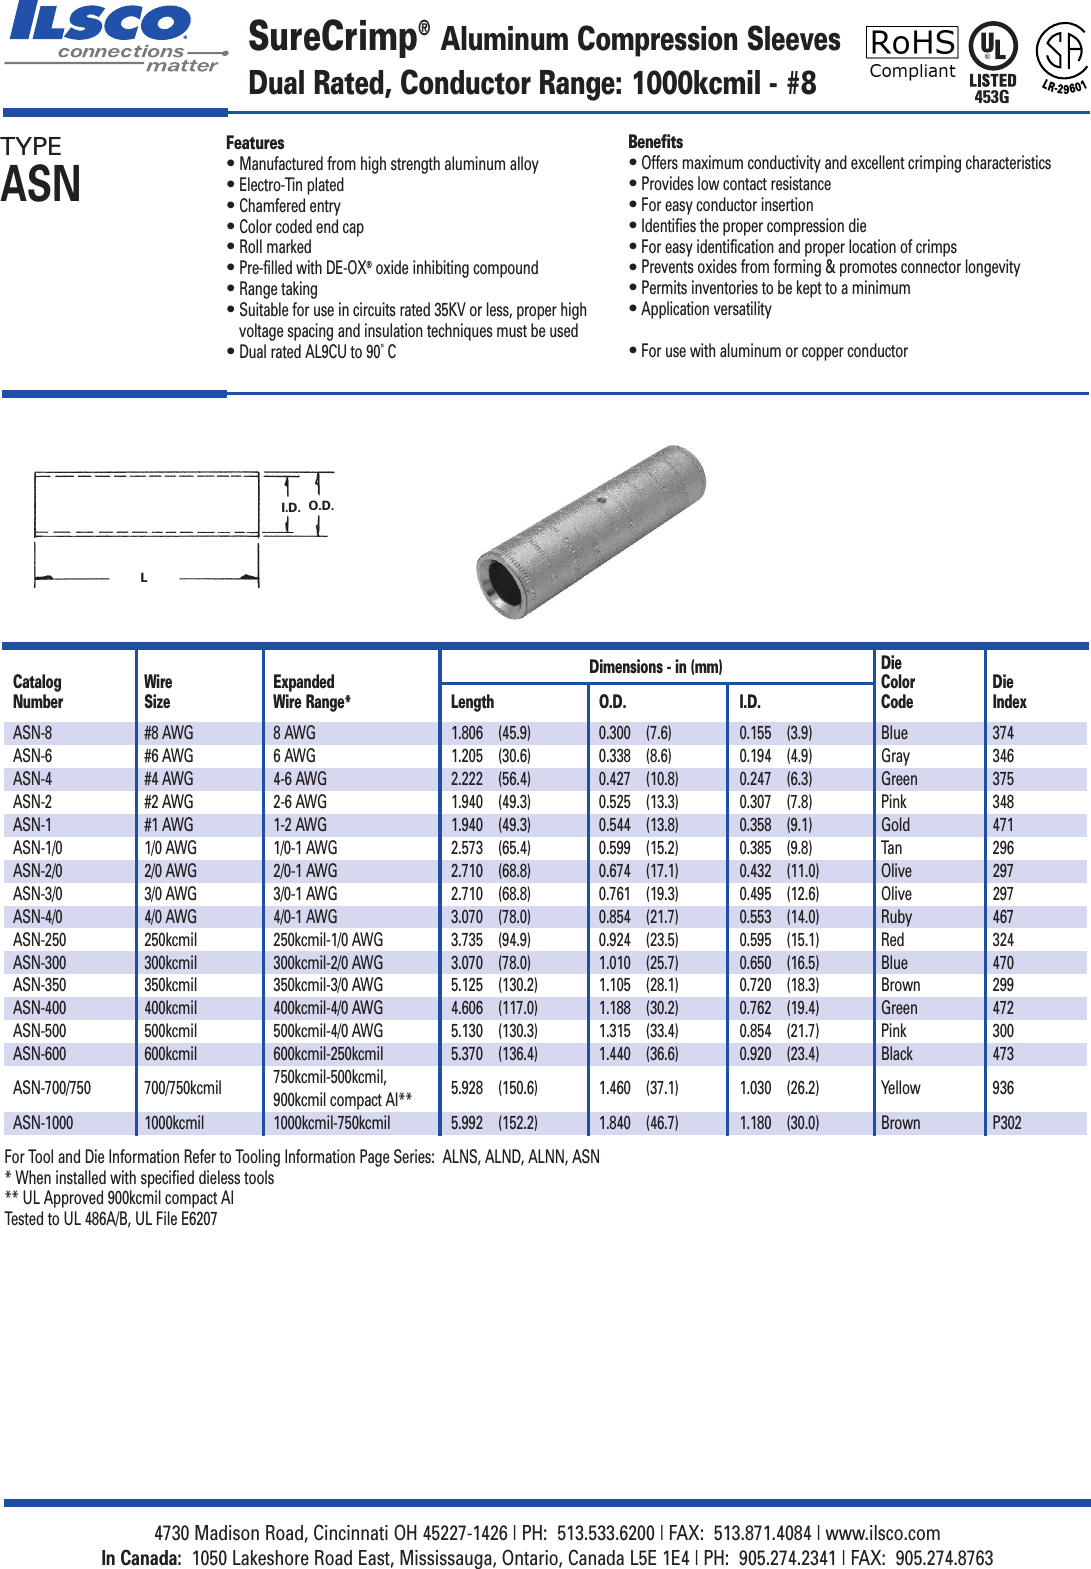 Page 4 of 9 - FORM 196 ALN, ASN COMPRESSION 7-13-2015x  Brochure